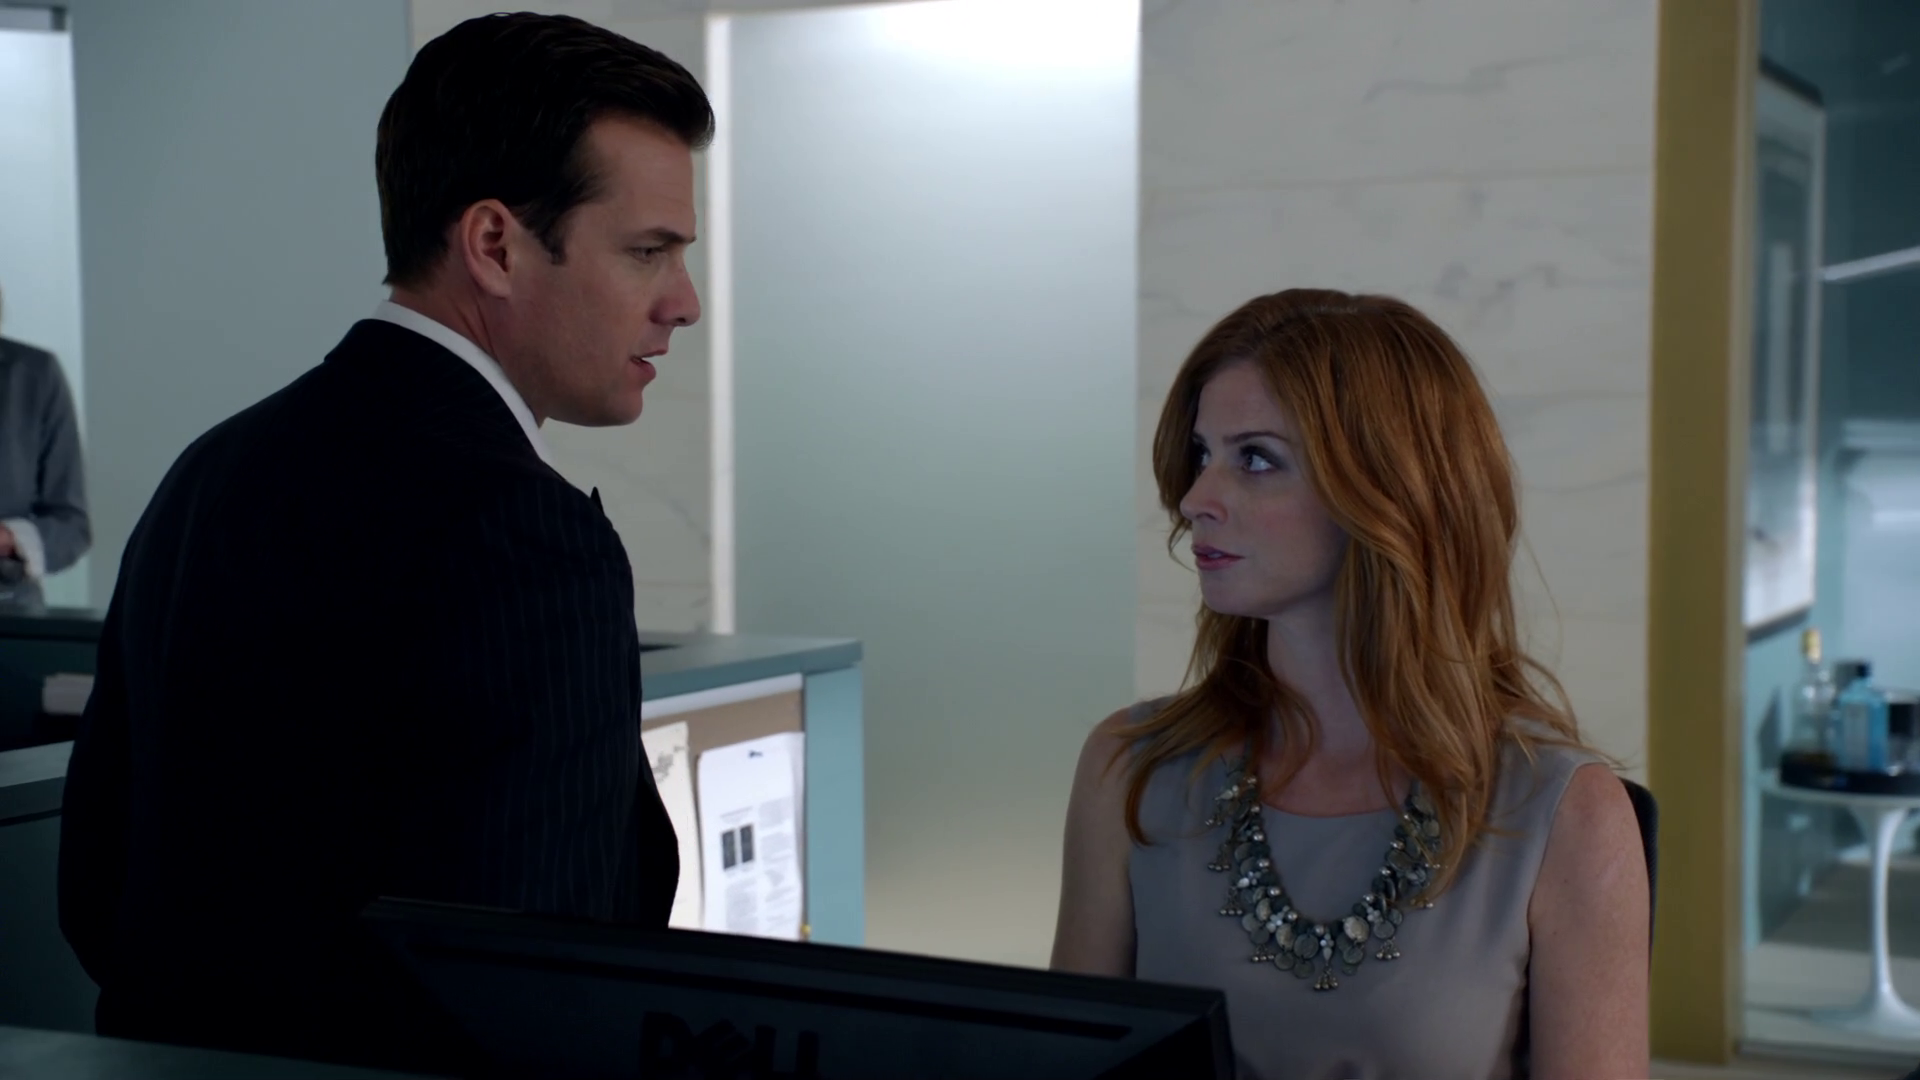 Image - S01E08P52 Harvey Donna.png | Suits Wiki | Fandom powered by Wikia